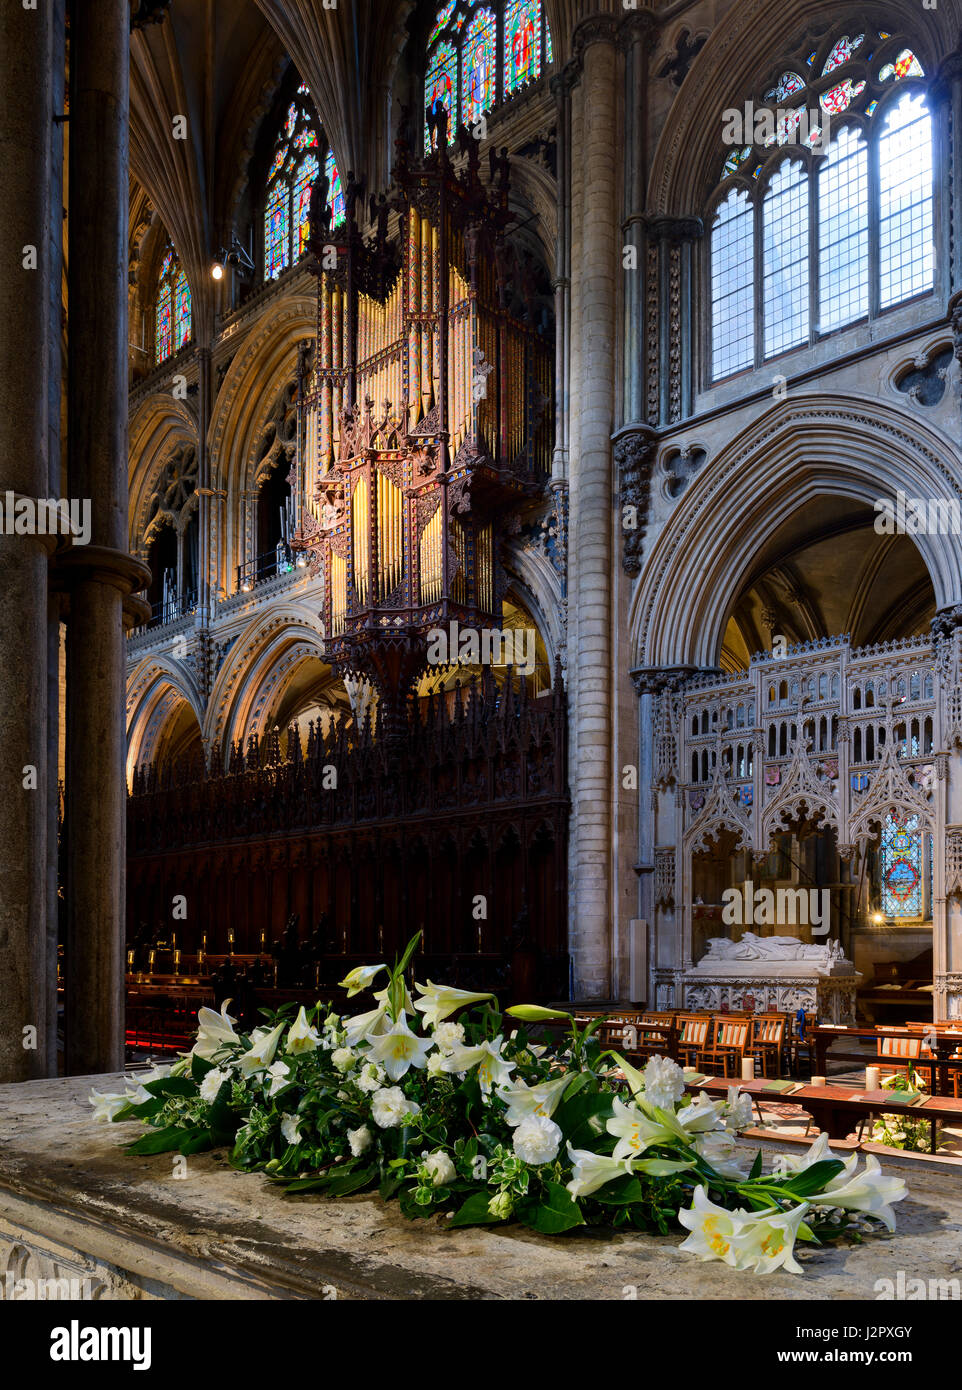 A view towards the quire and Organ at Ely Cathedral, Cambridgeshire, United Kingdom Stock Photo